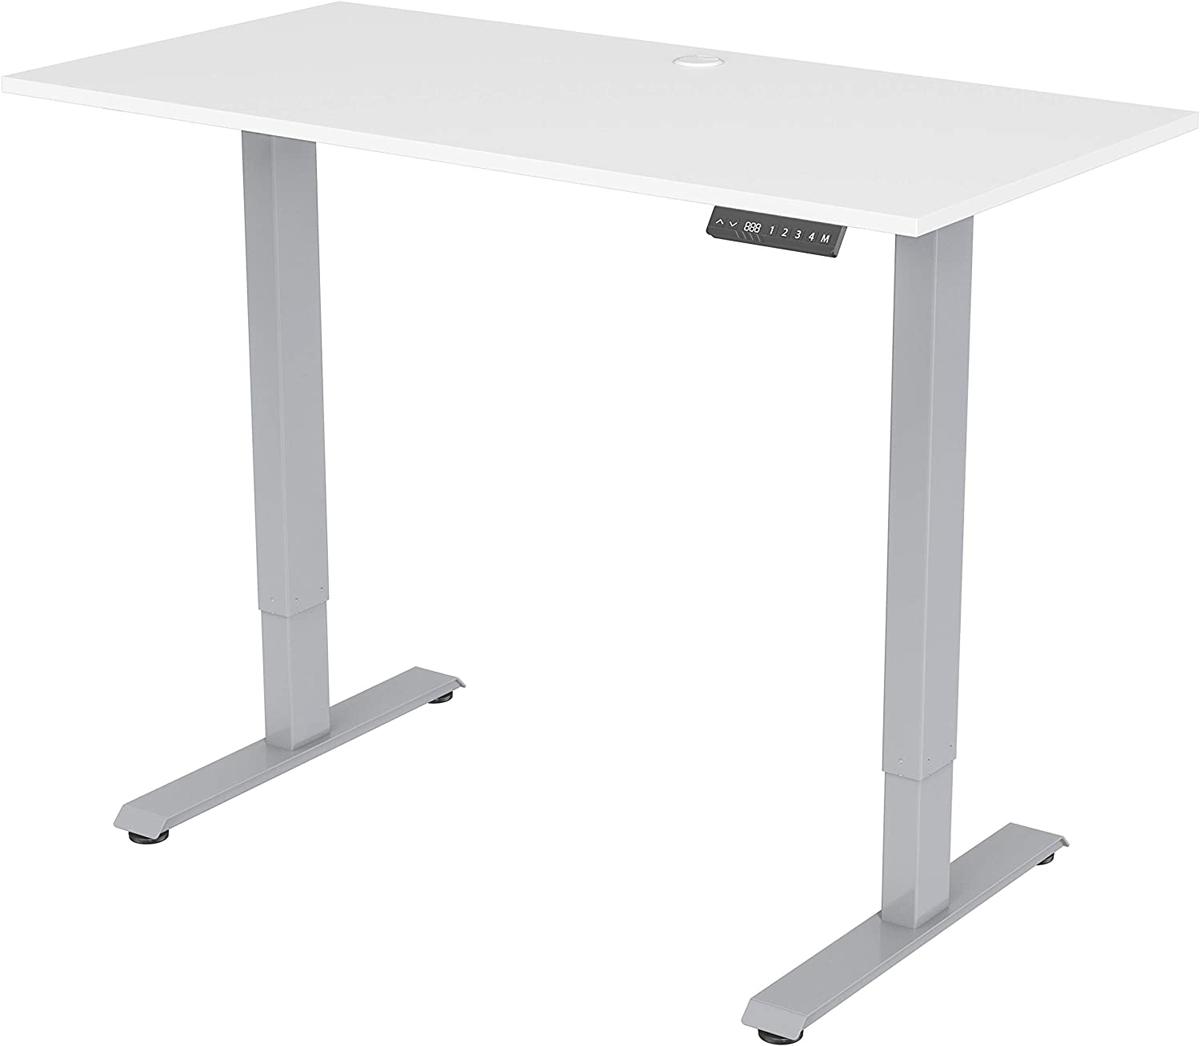 Lorell Dual-Motor Height-Adjustable Desk for $156.37 Shipped